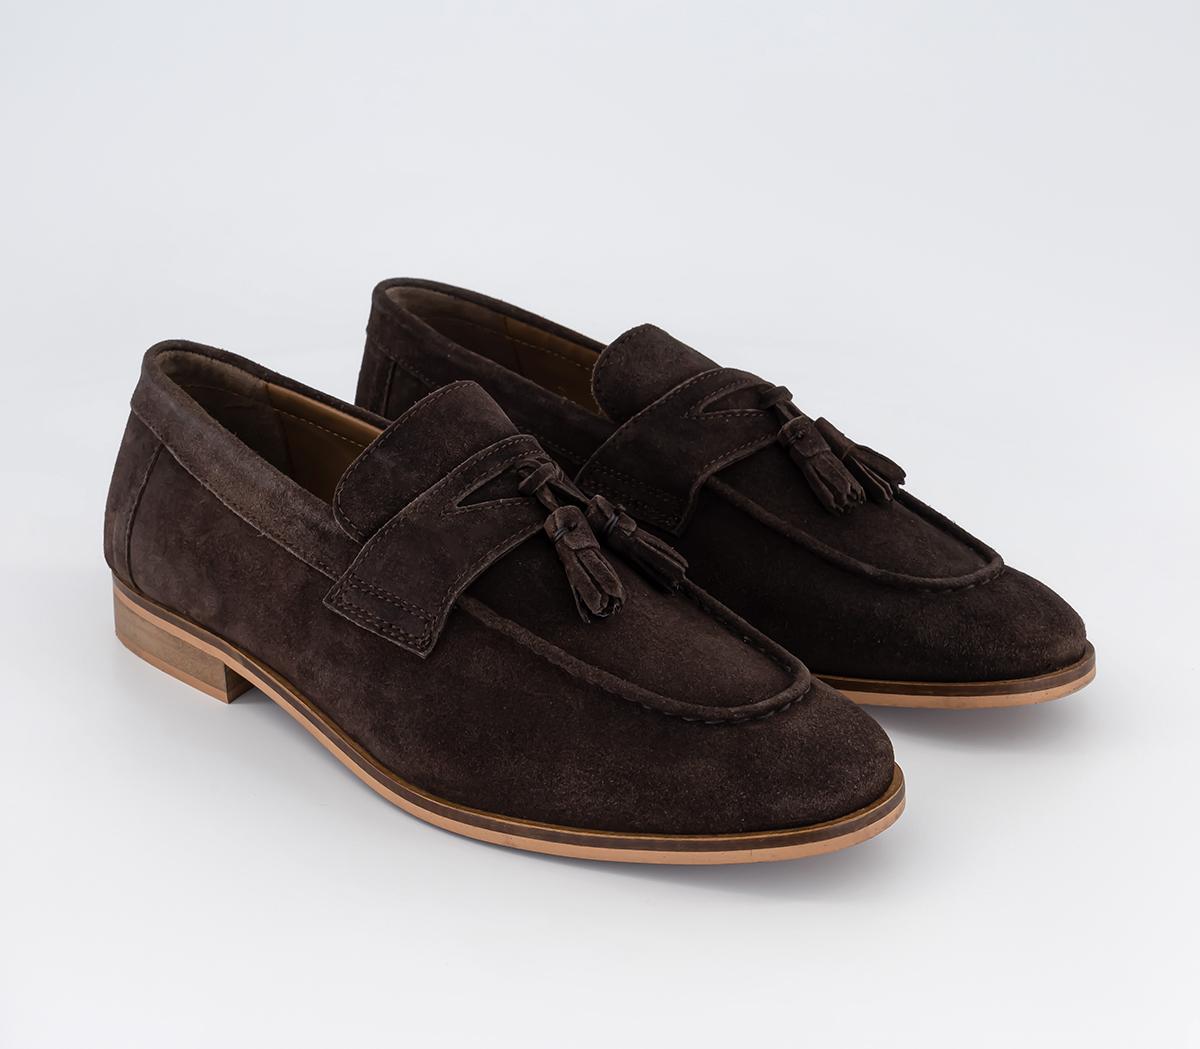 OFFICE Mens Channing Tassle Loafers Brown Suede, 12